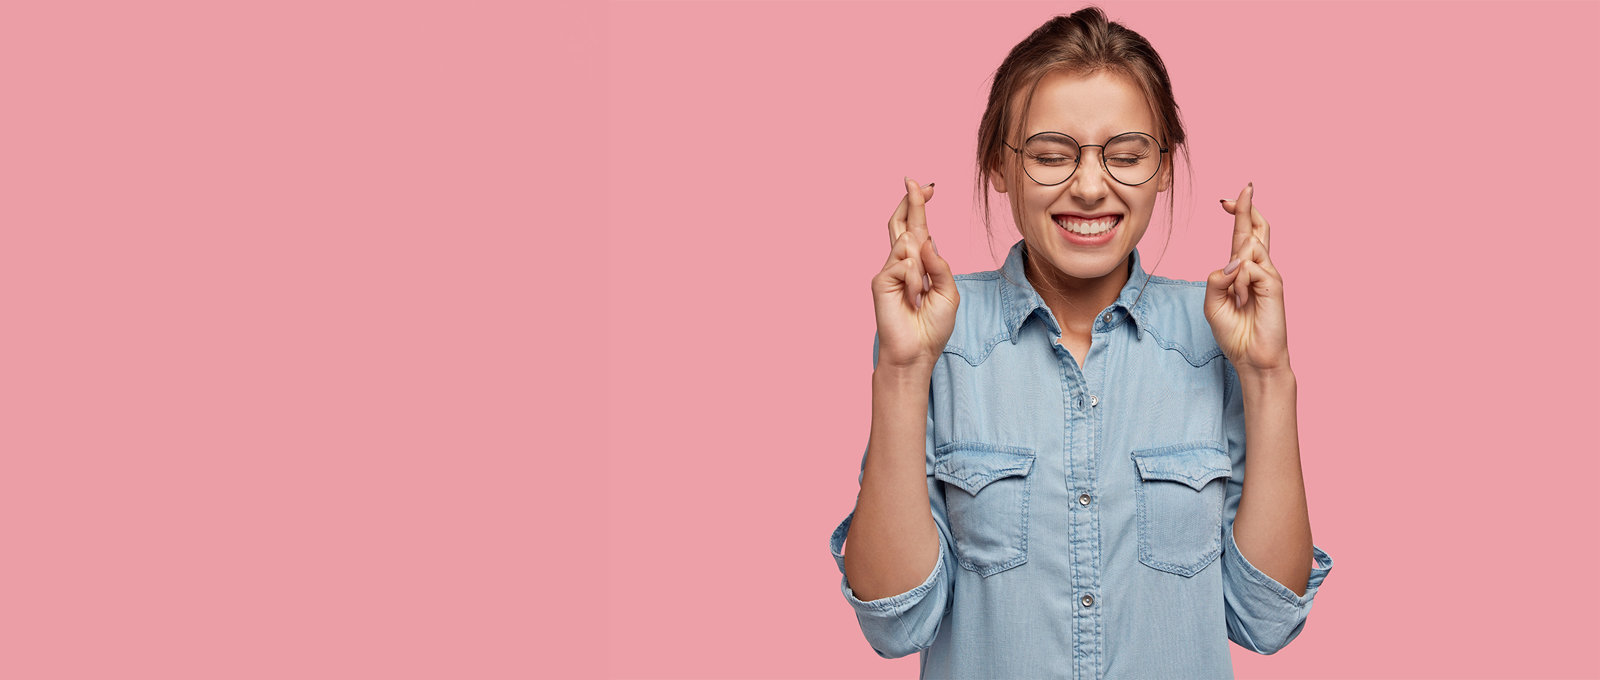 Photo of a young woman with her eyes closed and fingers crossed in front of a pink background